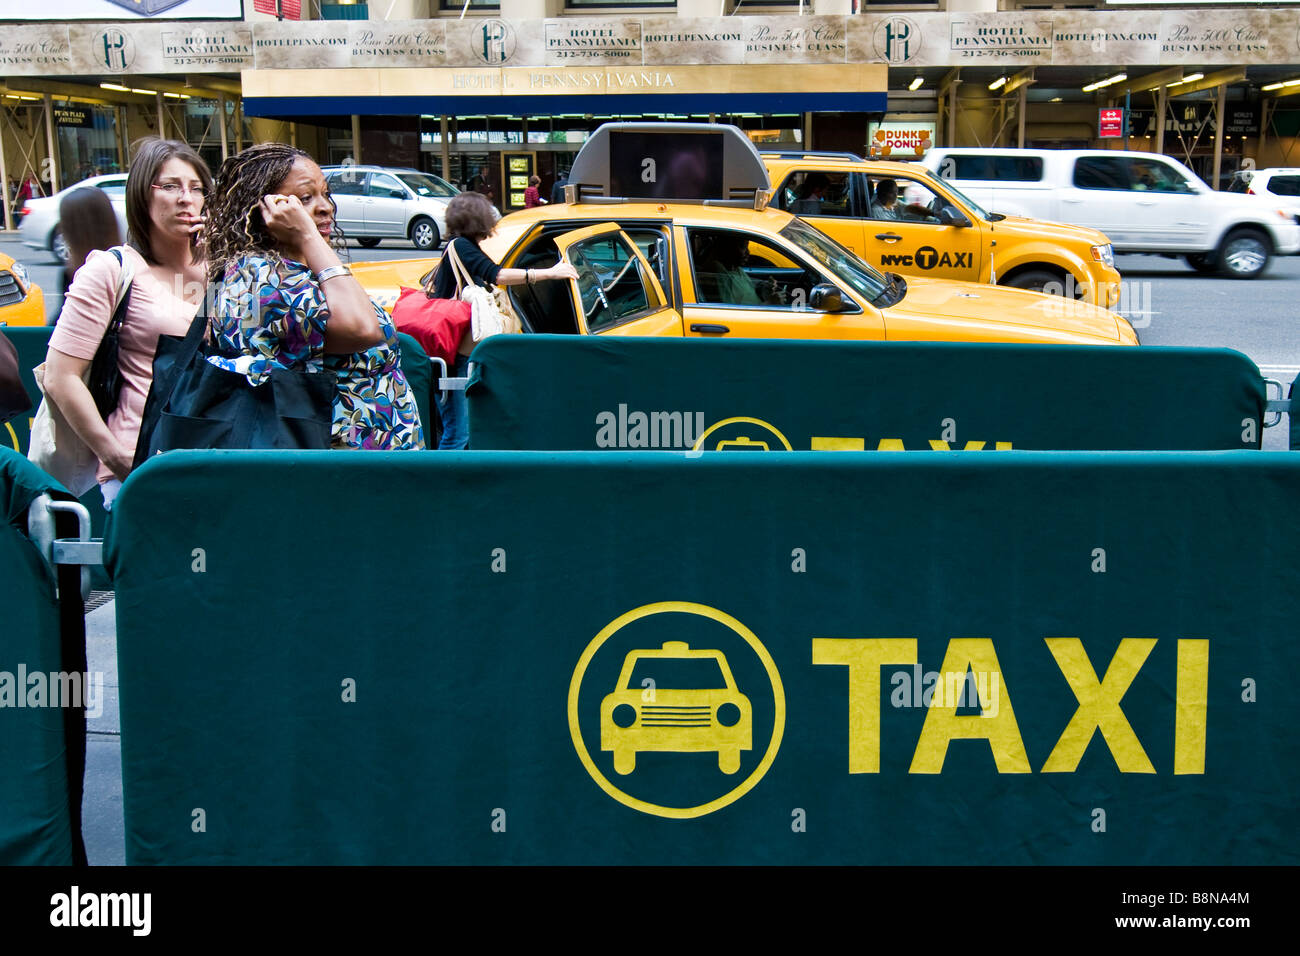 People queuing for taxis Stock Photo